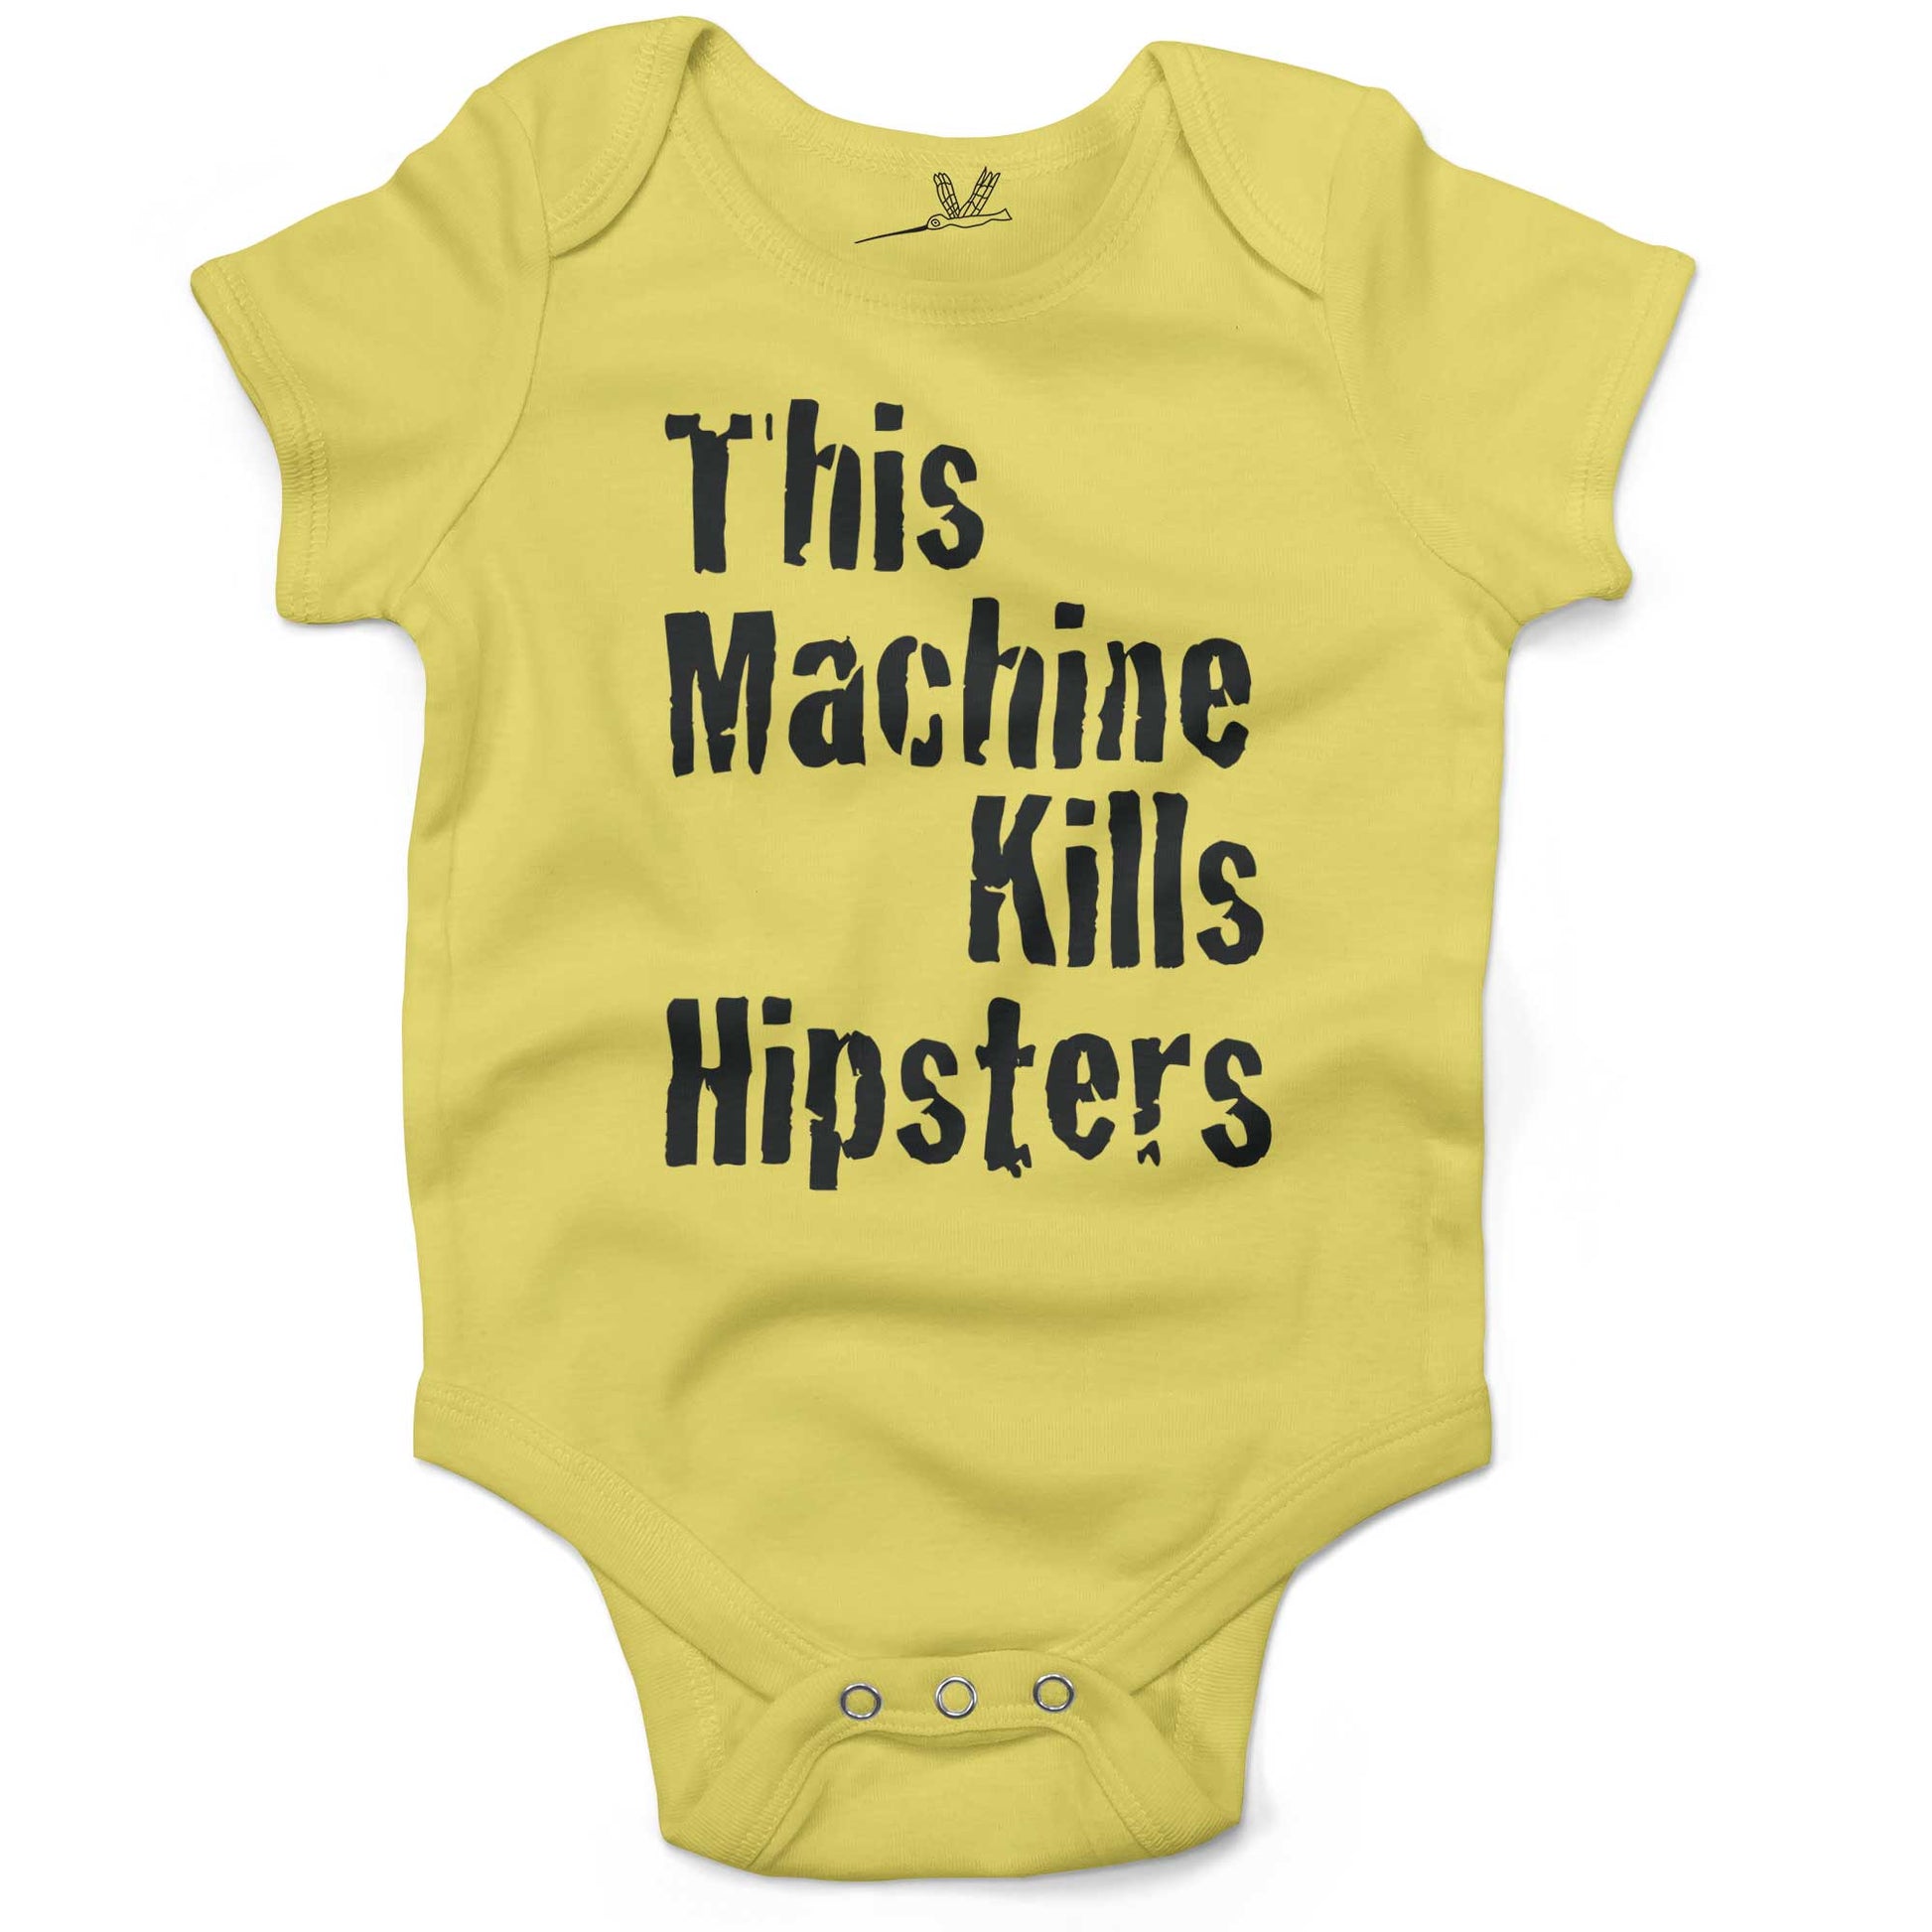 This Machine Kills Hipsters Infant Bodysuit or Raglan Tee-Yellow-3-6 months